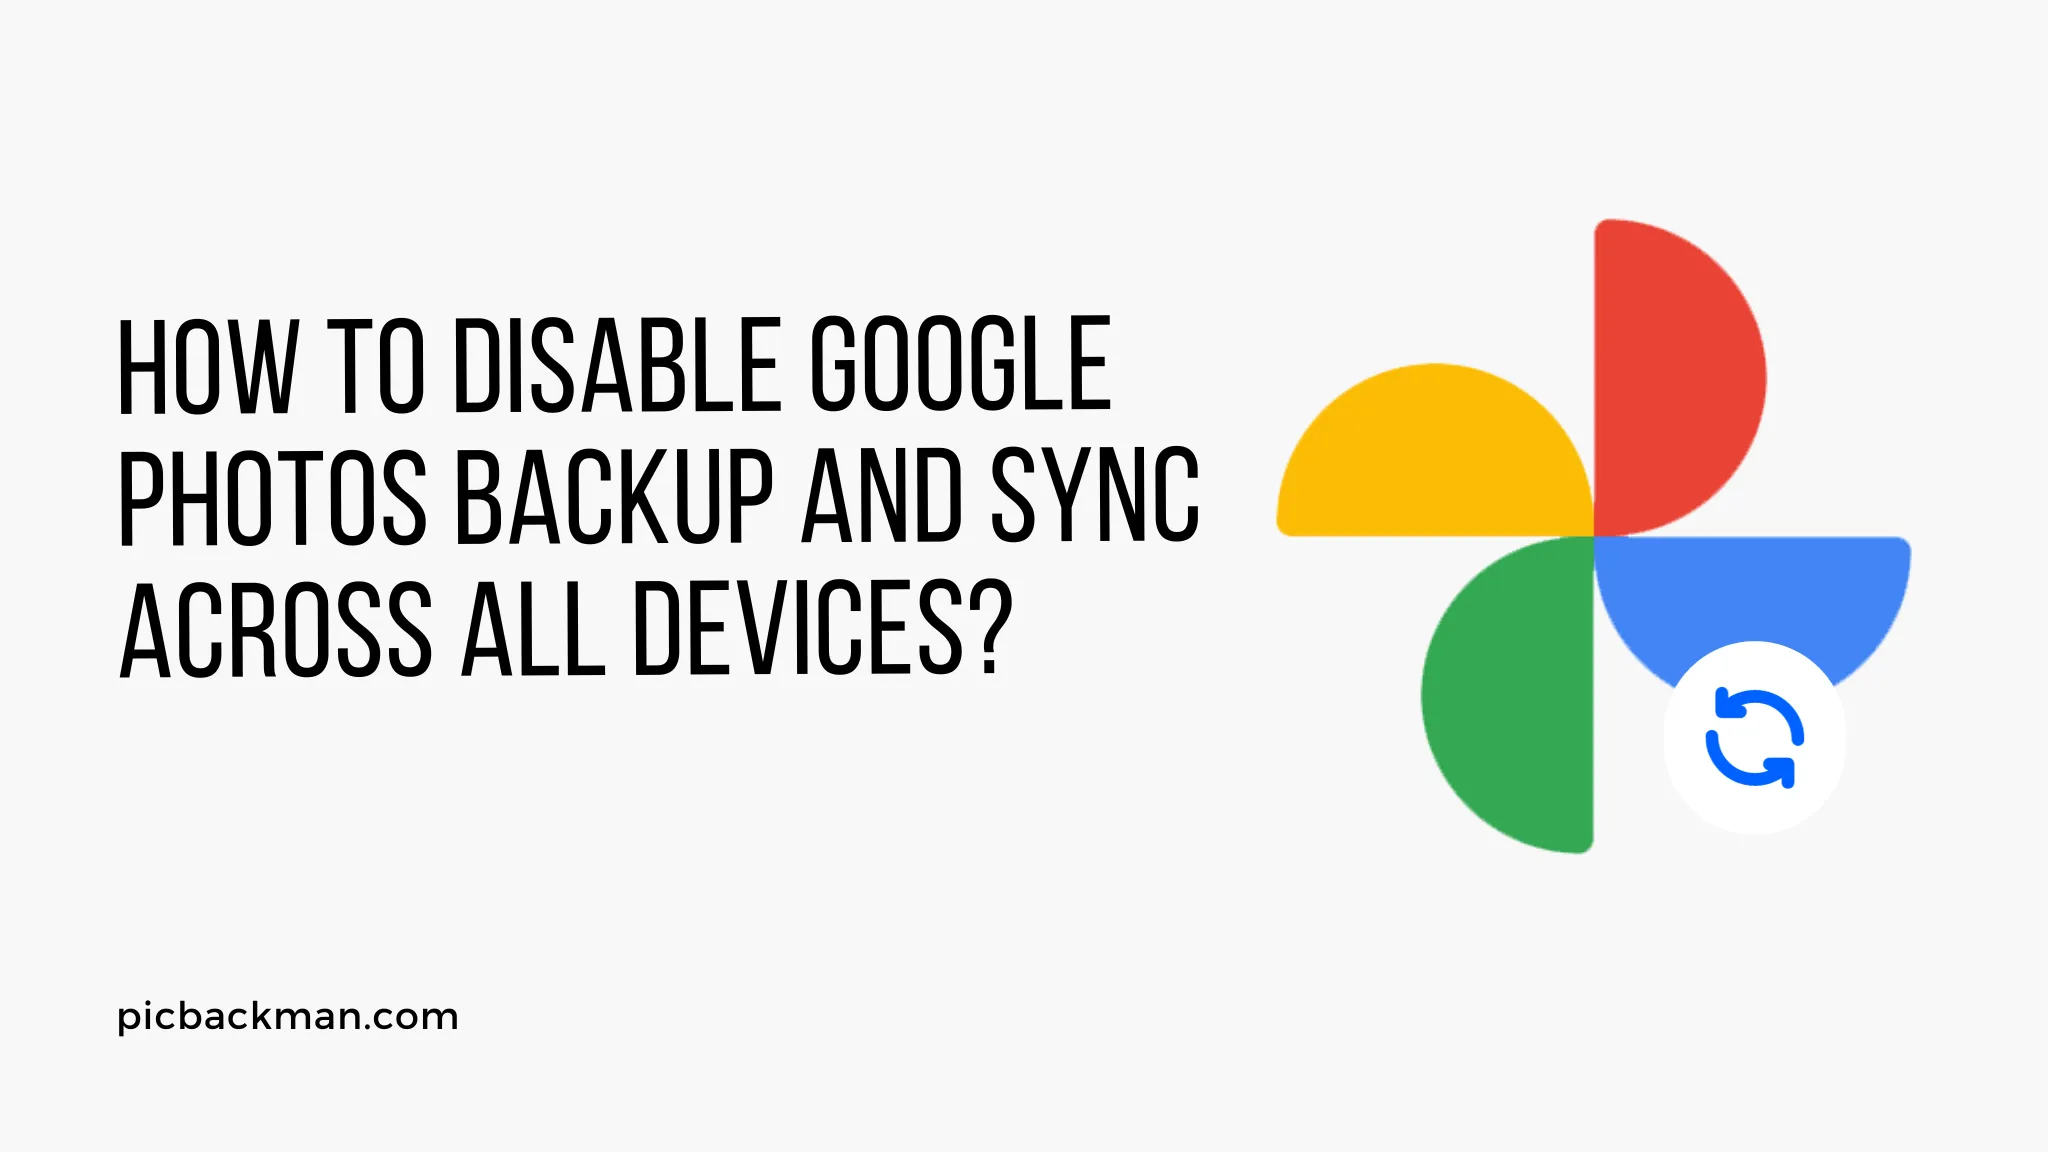 How to Disable Google Photos Backup and Sync Across All Devices?